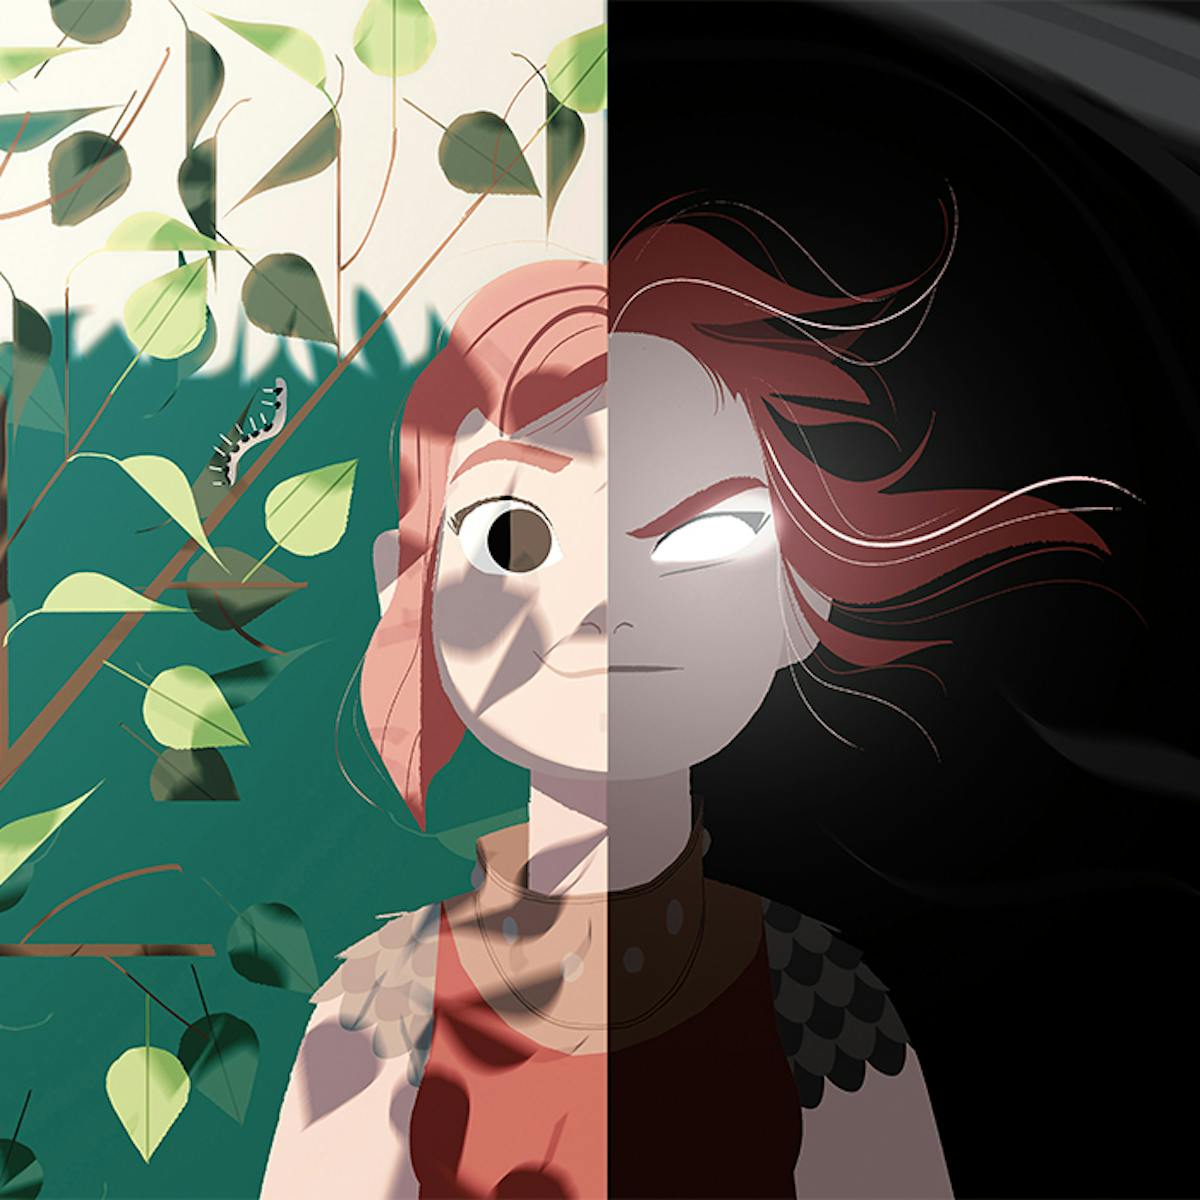 Nimona’s (Chloë Grace Moretz) face is split — between a dark and stormy scene and a bright and sunny one. The duality!